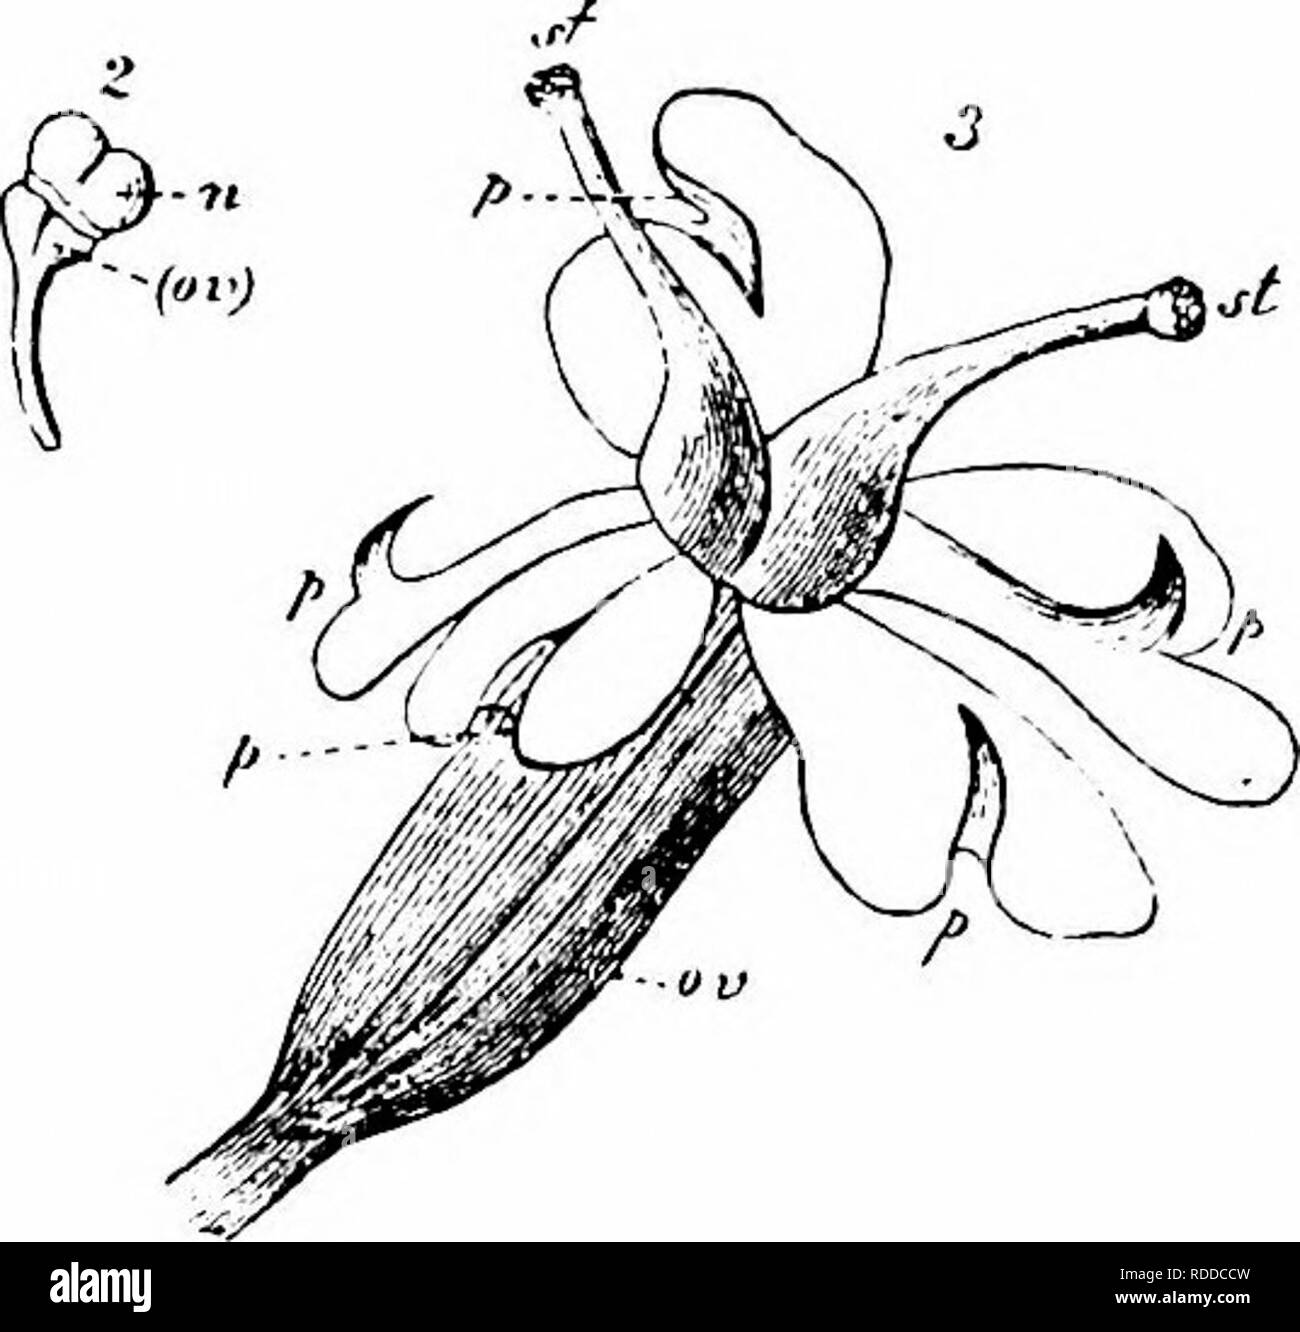 . Handbook of flower pollination : based upon Hermann MuÌller's work 'The fertilisation of flowers by insects' . Fertilization of plants. 5i6 ANGIOSPERMAEâDICOTYLEDONES 378. Myrrhis L. 1199. M. odorata Scop. (Herm. Muller, ' Fertilisation,'p. 278, ' Weit. Beob.,' I, p. 311; Schulz, 'Beitrage,' II, p. 191.)âSchulz describes this species as andro- monecious, with protandrous hermaphrodite flowers. Herm. Miiller says that the last flowers which appear are purely male, their small petals falling oflf without ovary, styles, or stigmas having developed. These flowers consequently provide pollen for  Stock Photo